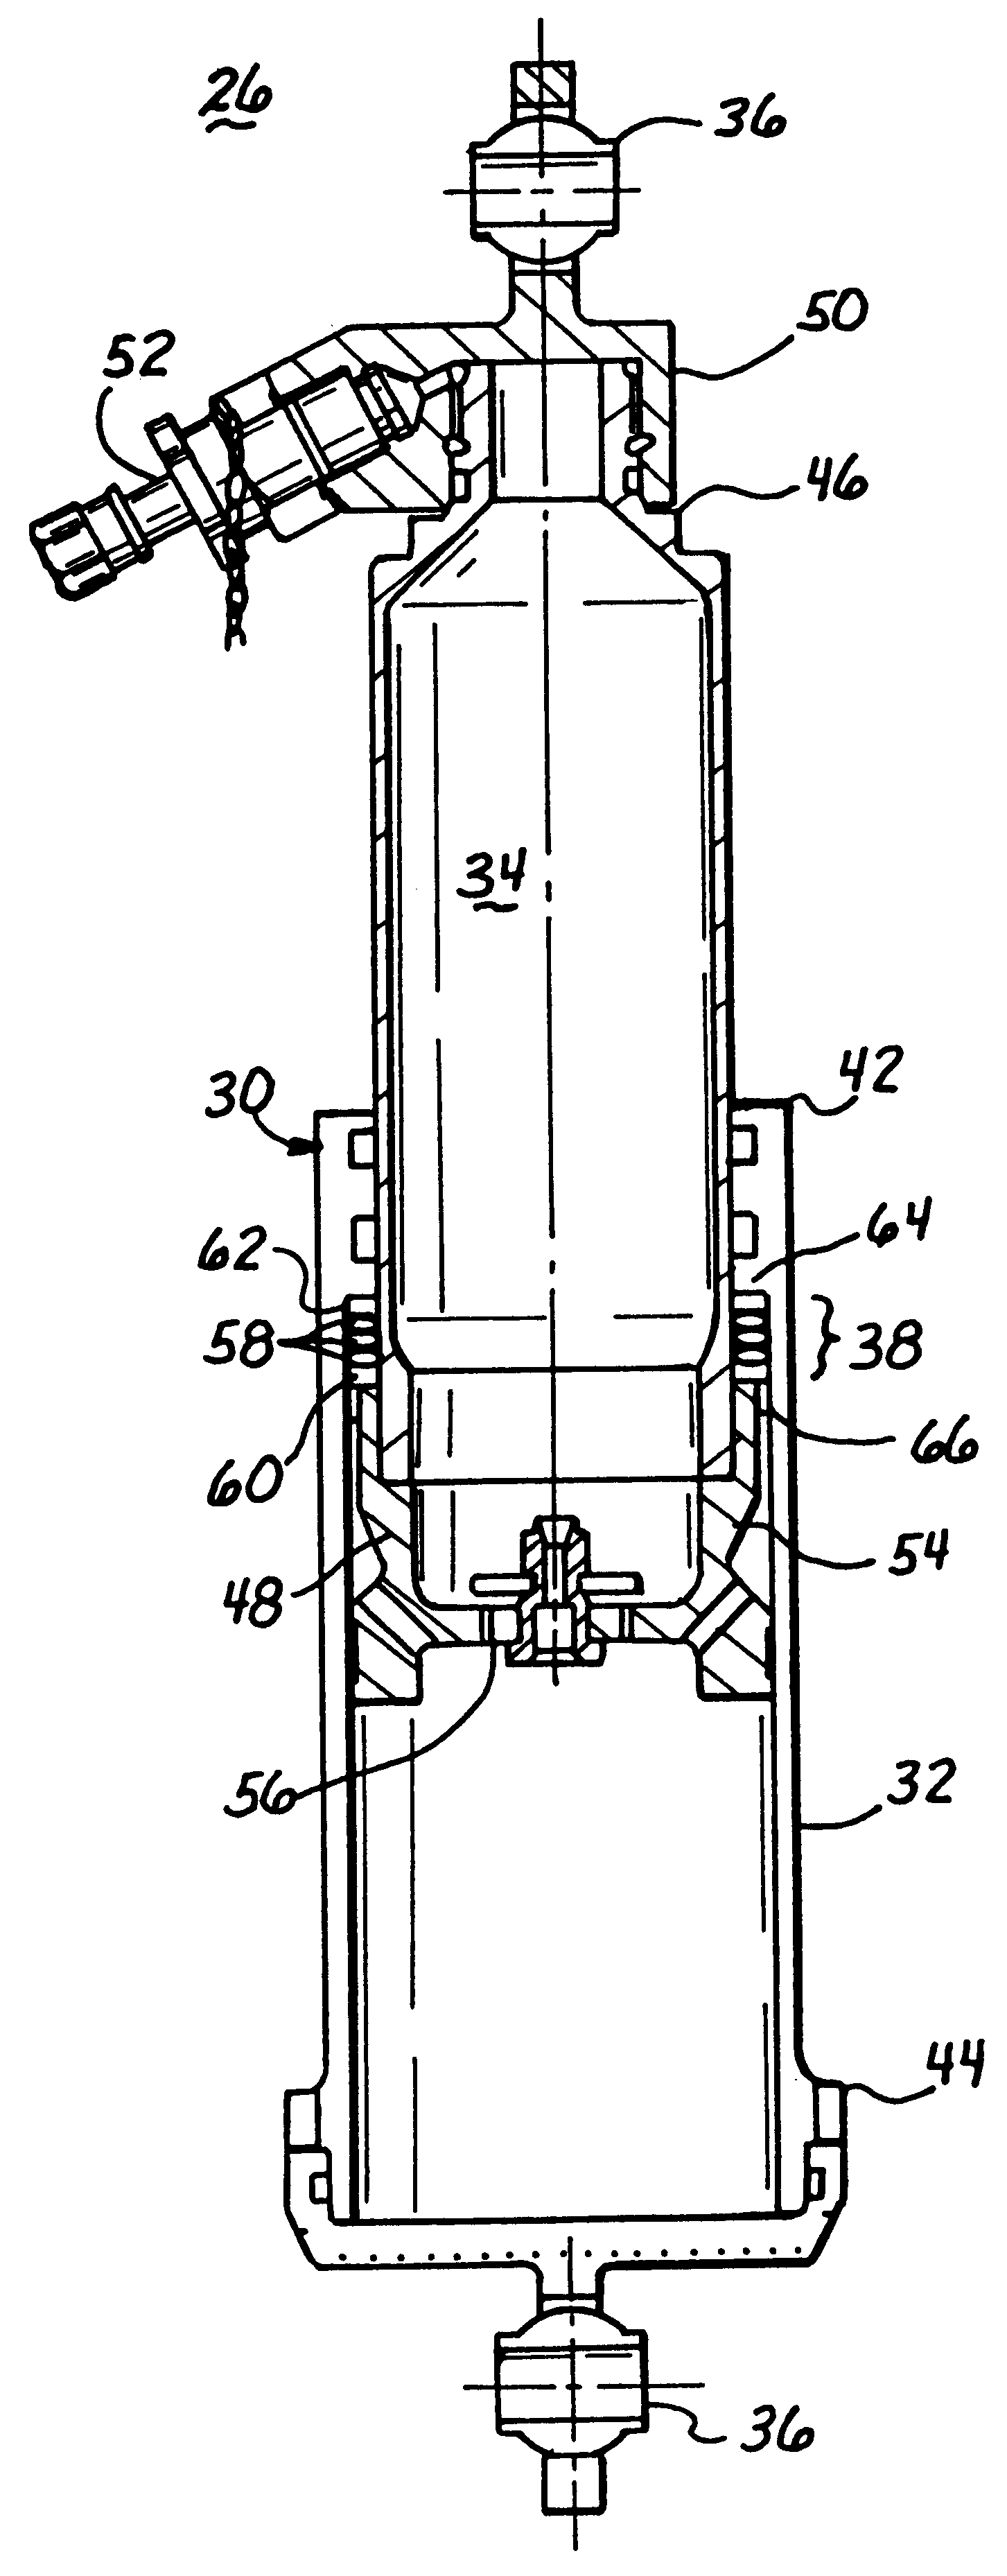 Hydraulic damper with elastomeric spring assembly